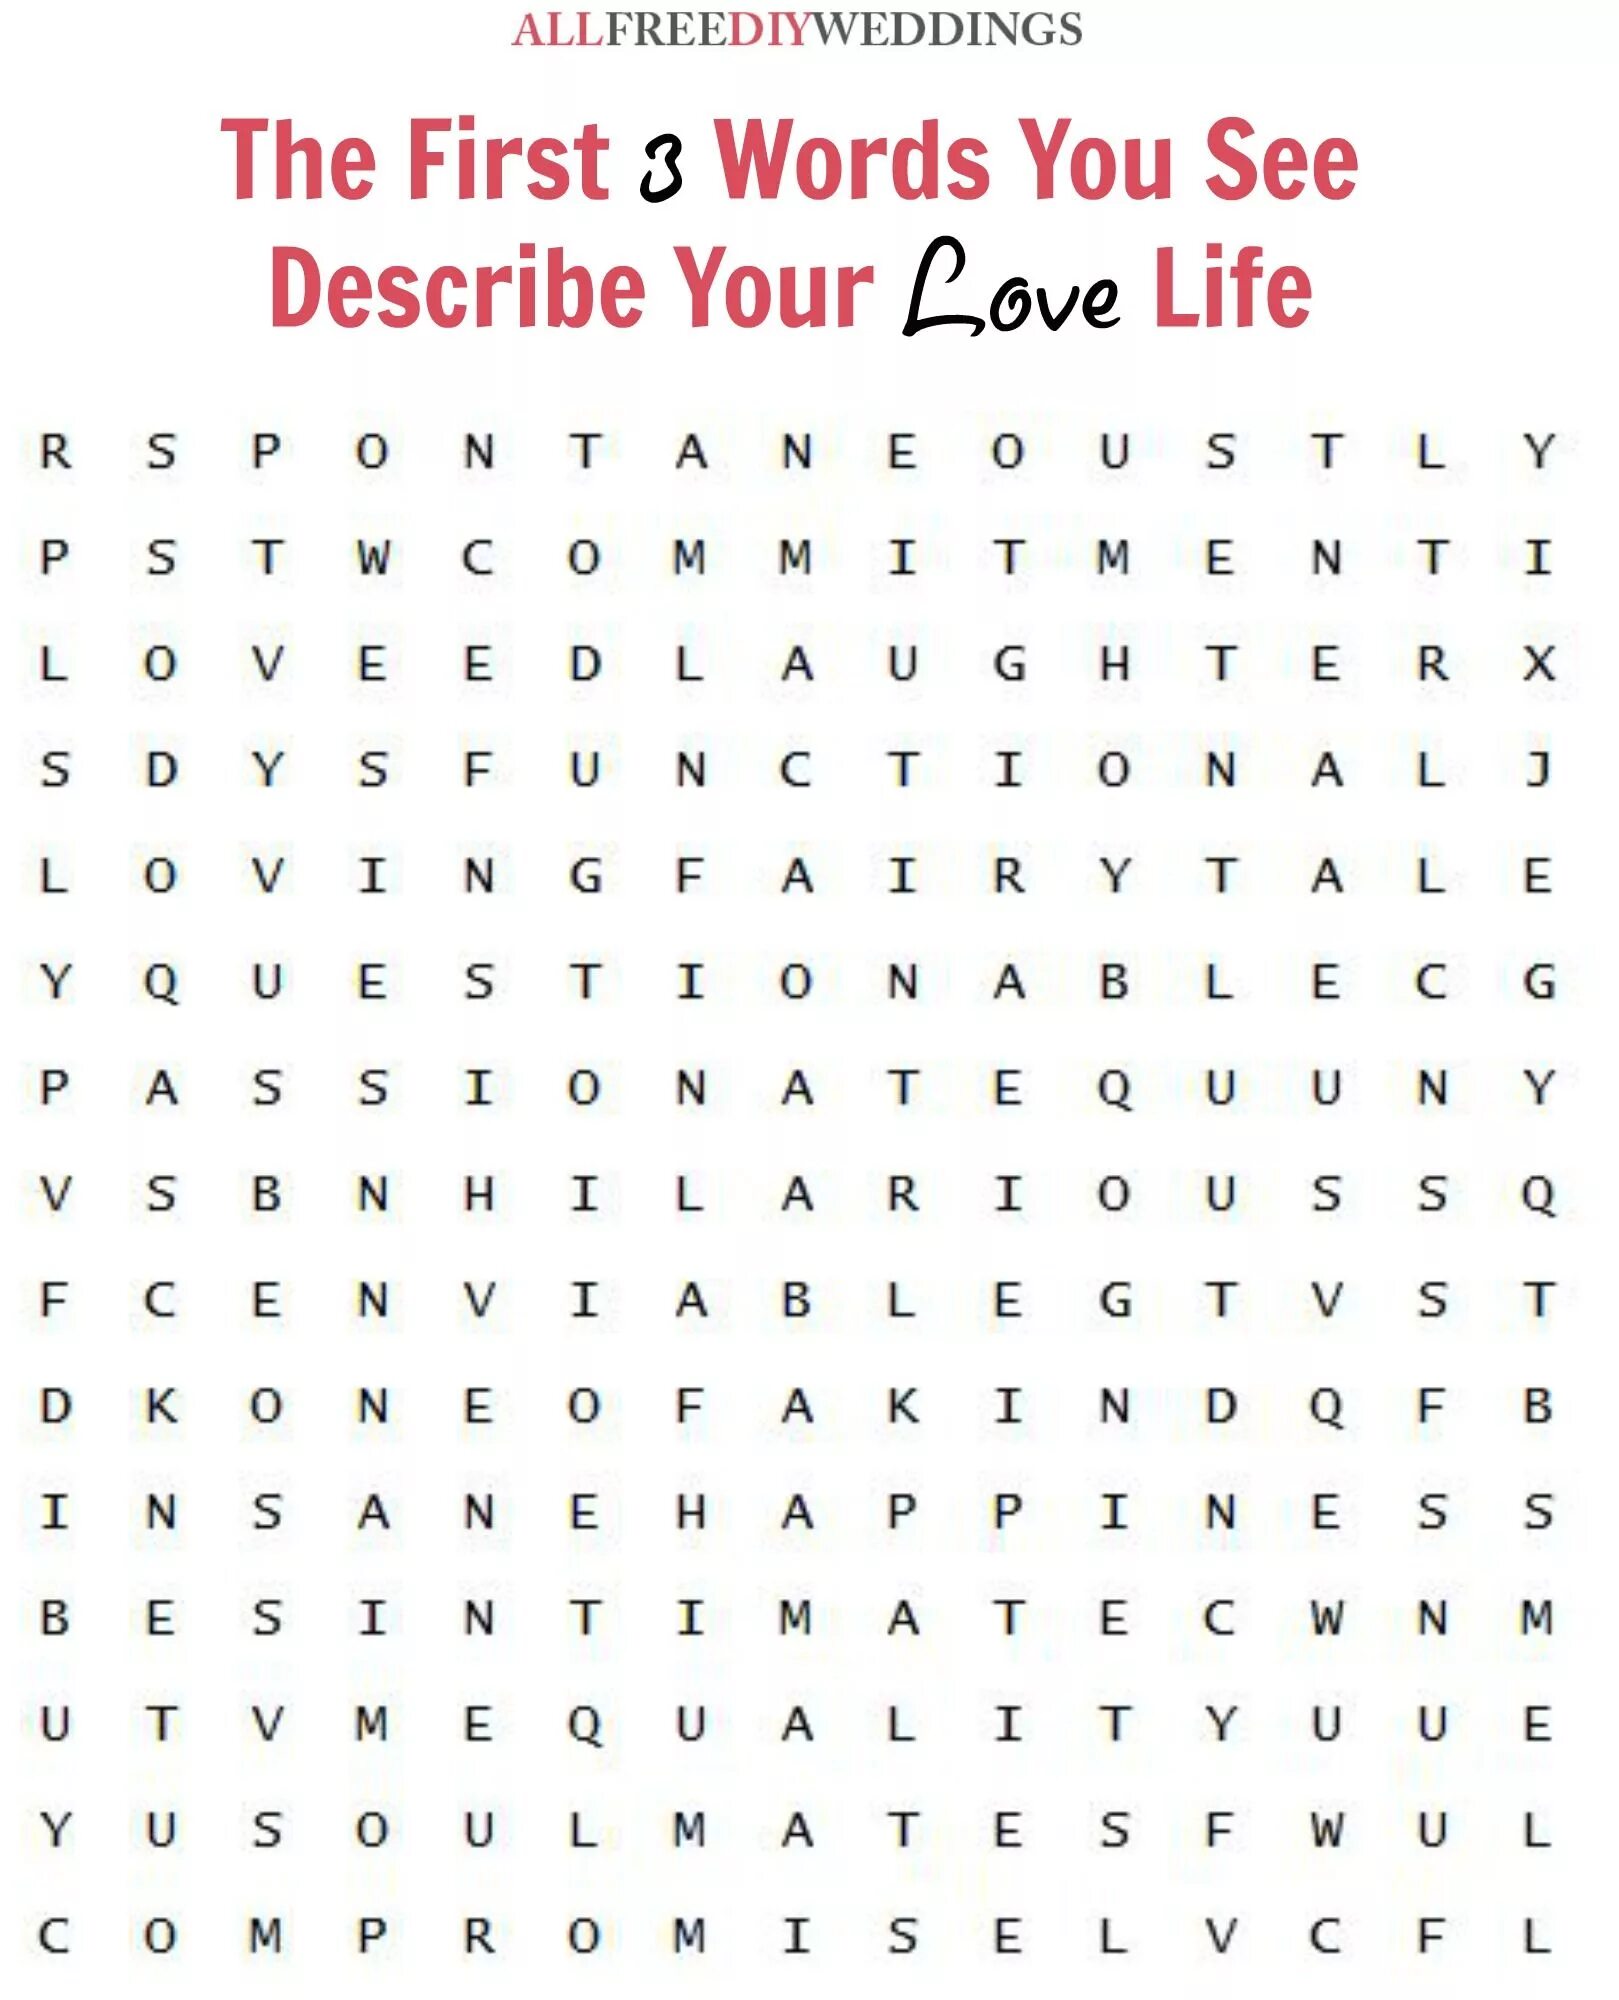 One word for three. The first 3 Words you see. What3words. 3 Words. First three Words describes your 2022.